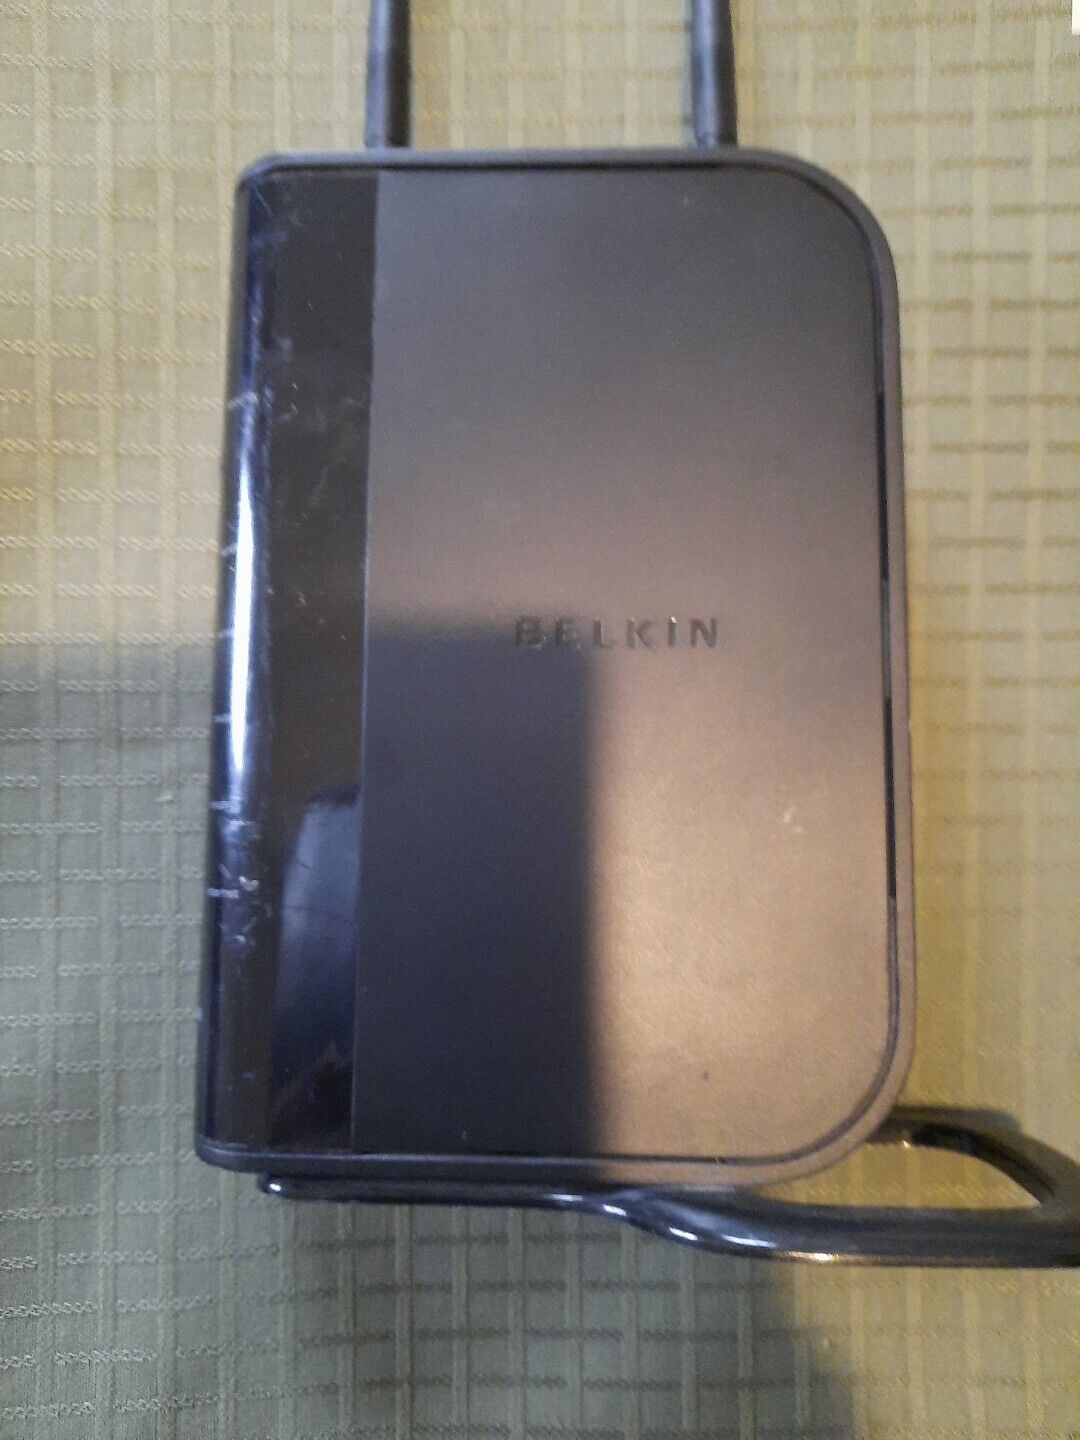 Belkin F5D8236-4 v1,  4-Port  Wireless N Router with charger, tested 